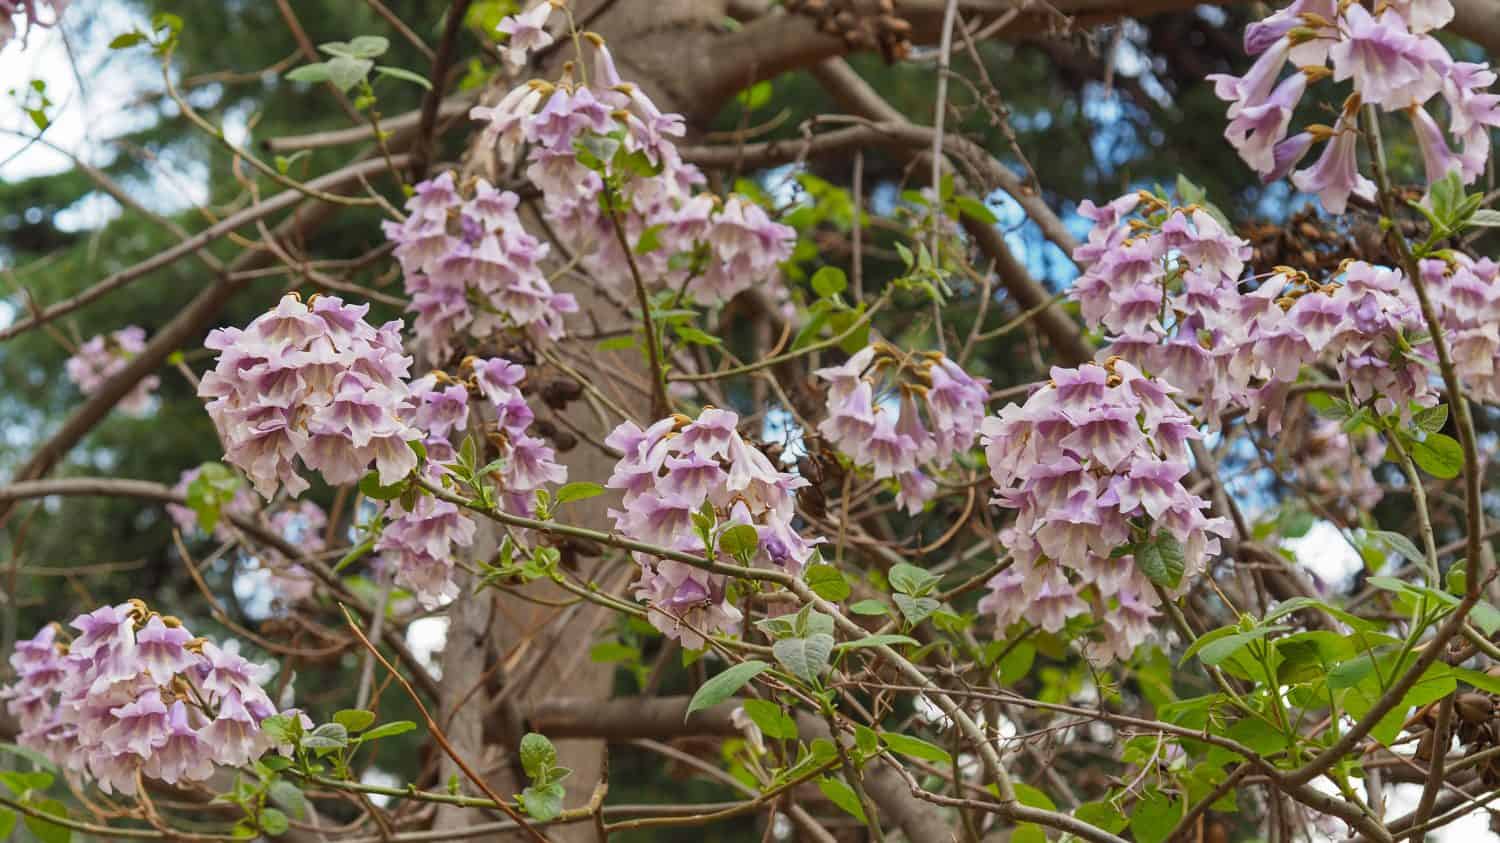 Paulownia elongata tree with light violet blossoms. On the branches of Royal Paulownia, pink pastel colored flowers with purple spots. Empress or Dragon tree, deciduous plant in Paulowniaceae family.